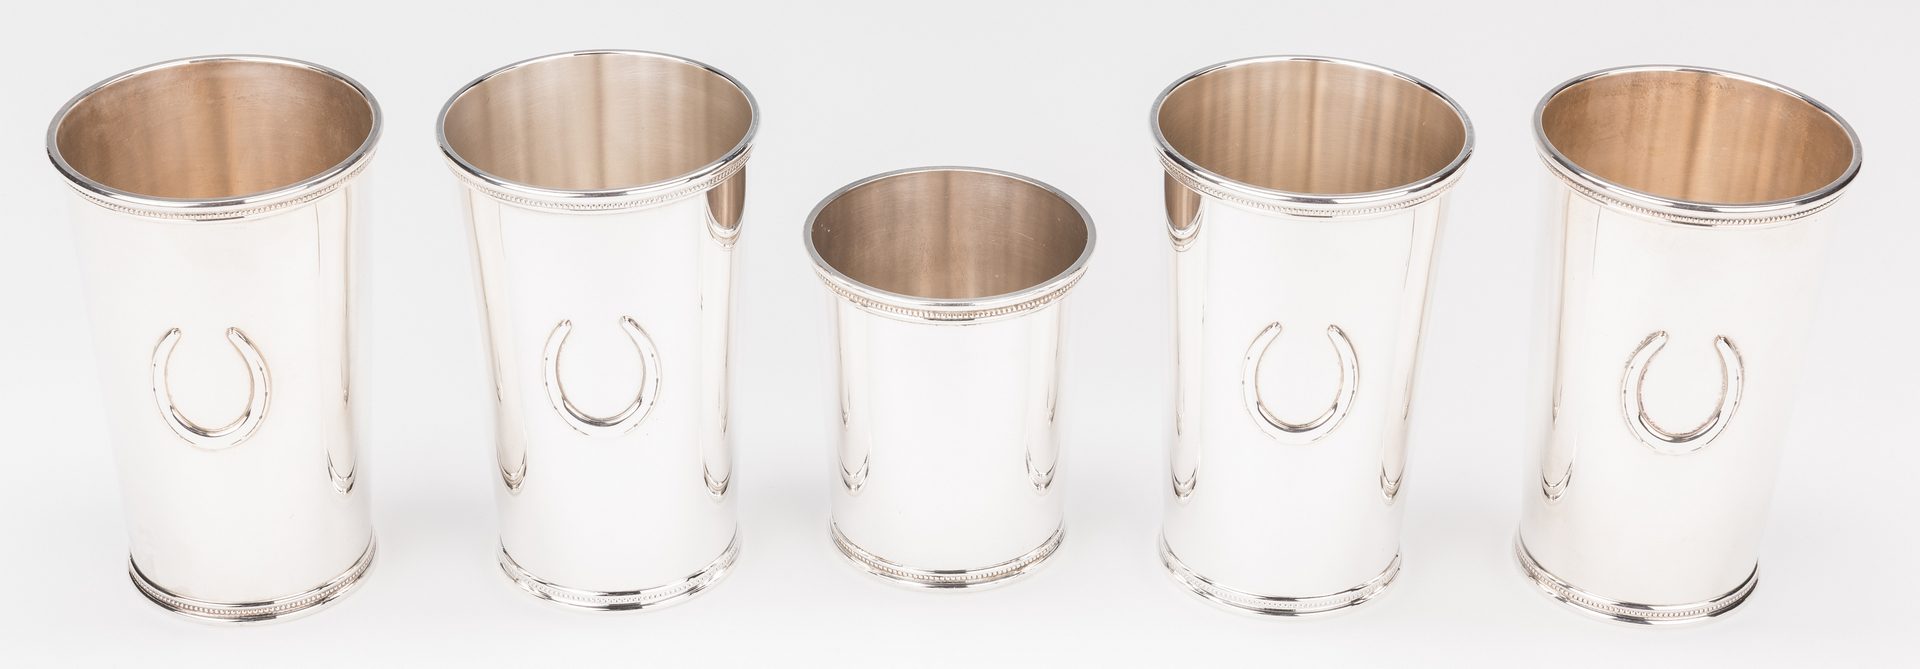 Lot 398: 5 Scearce Presidential Sterling Julep Cups  – Nixon Administration